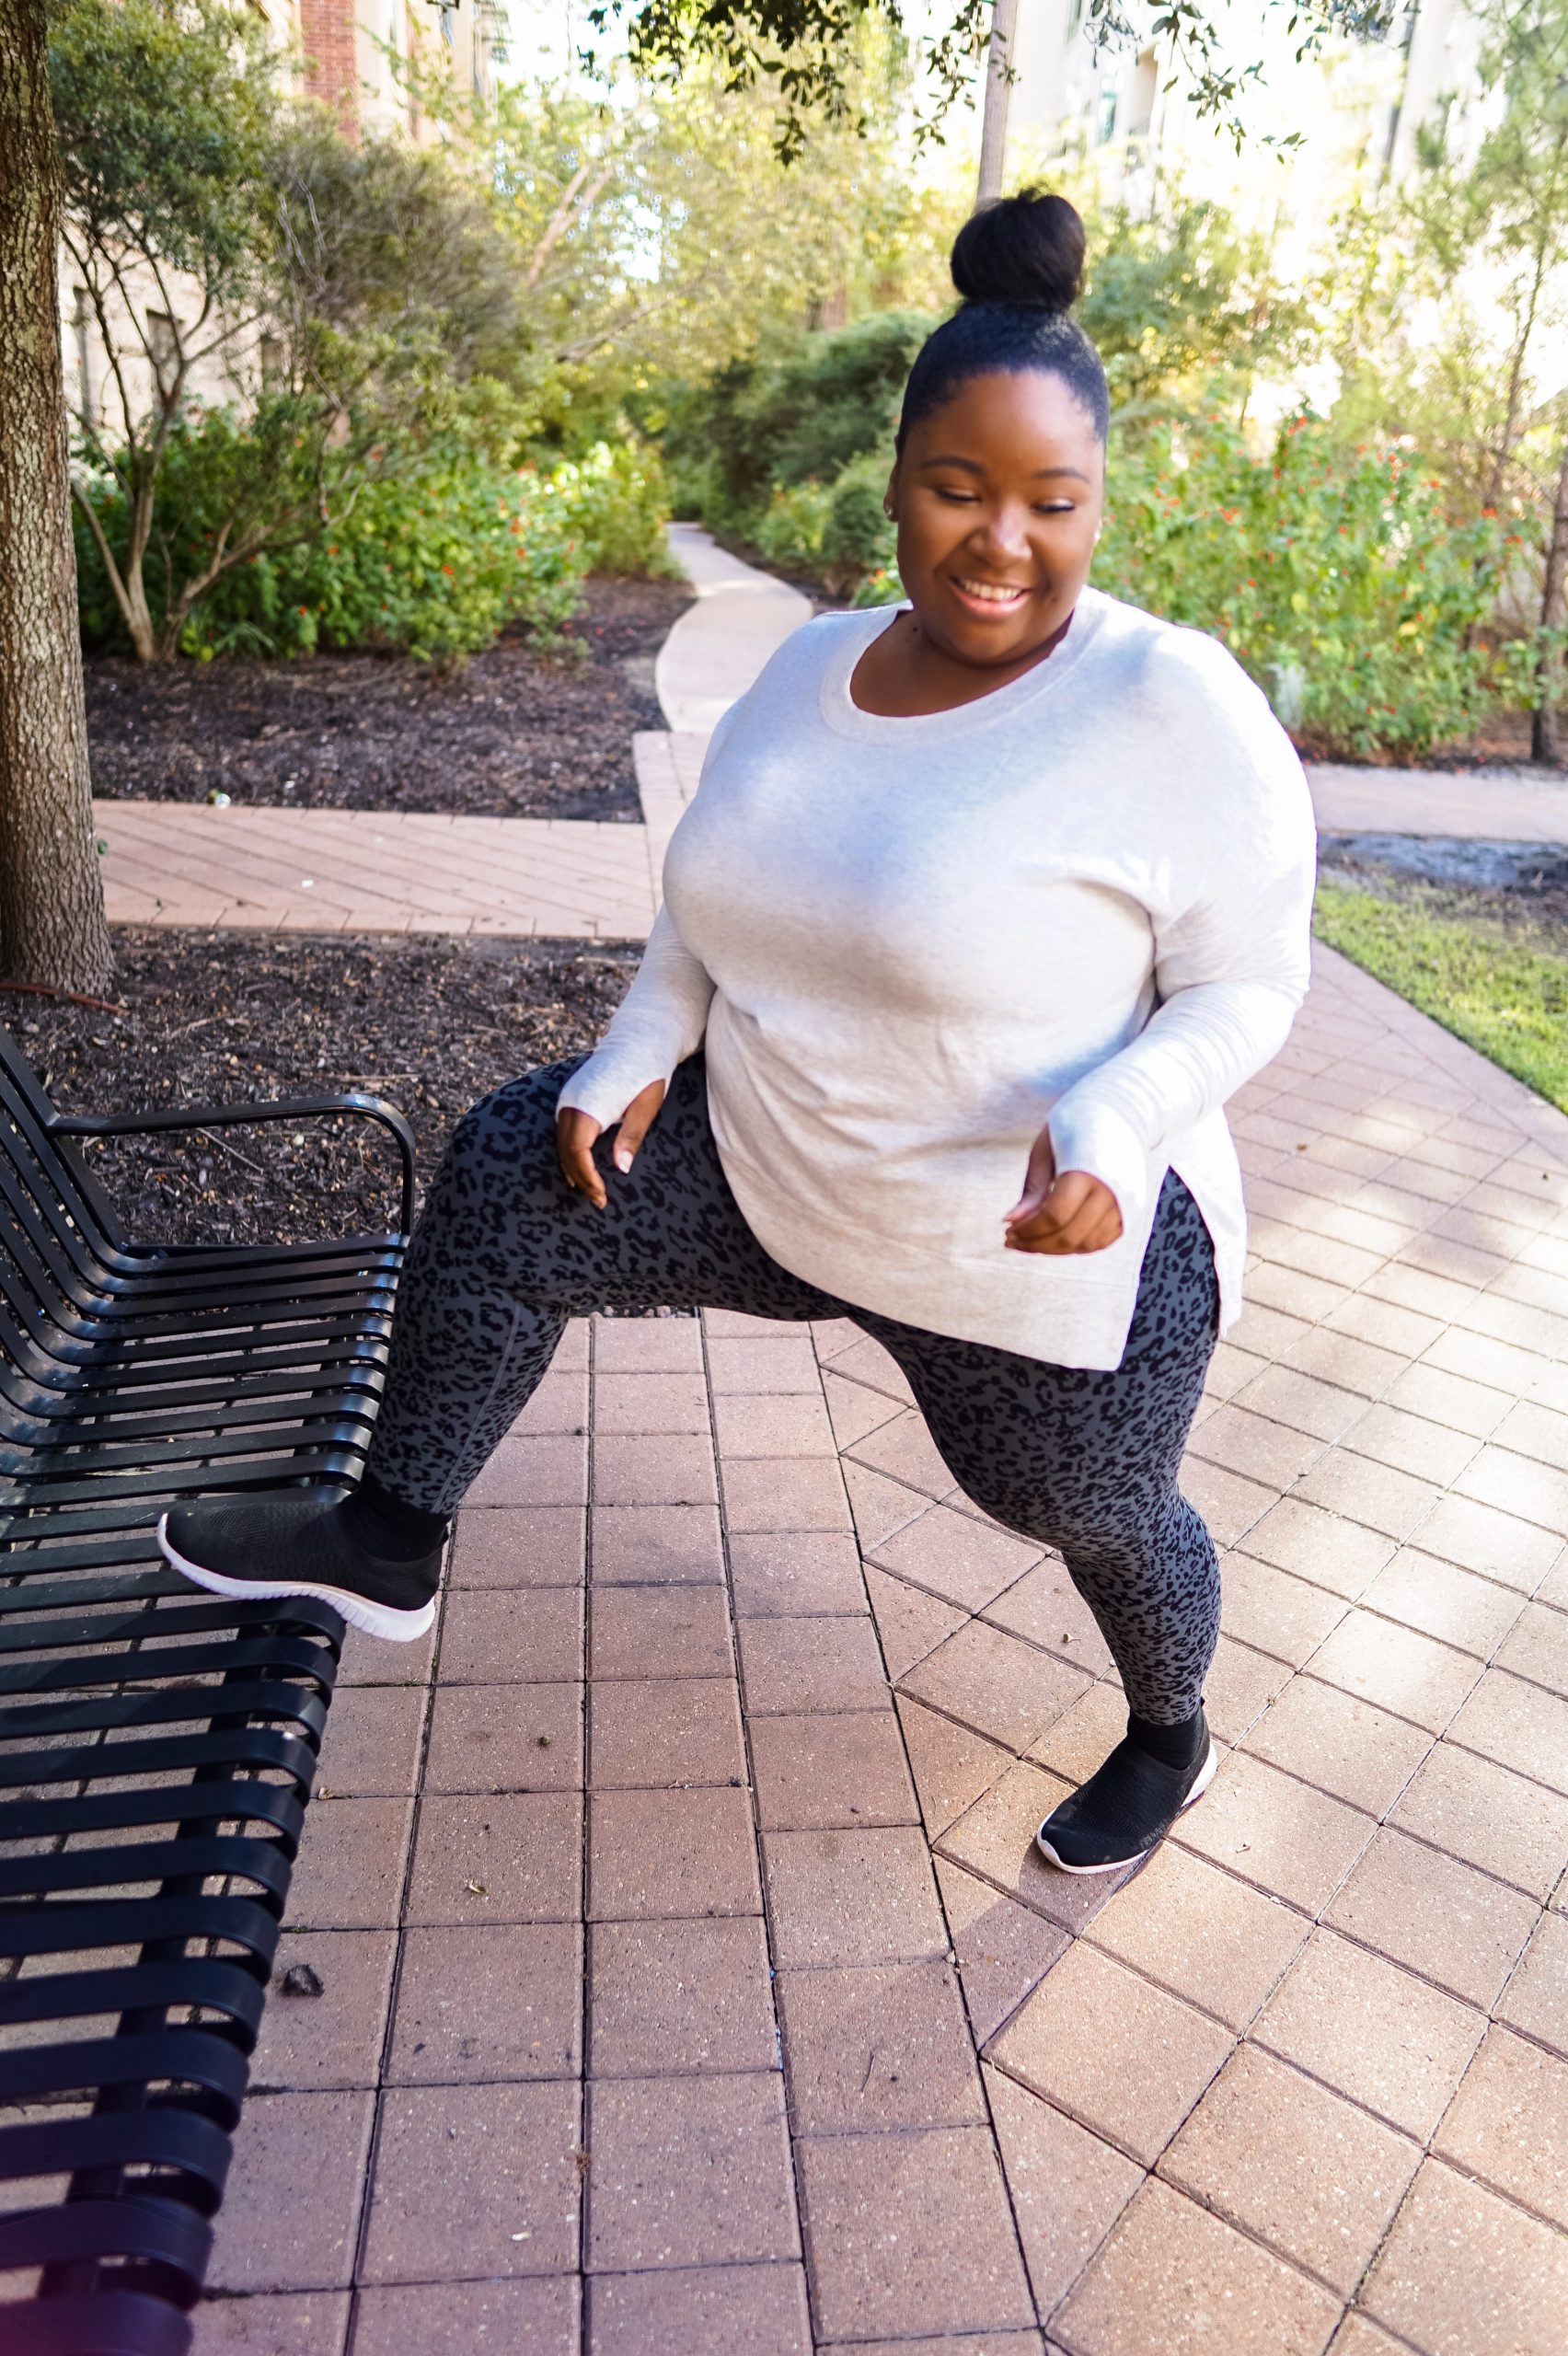 Plus-Size Gym Outfits - From Head To Curve